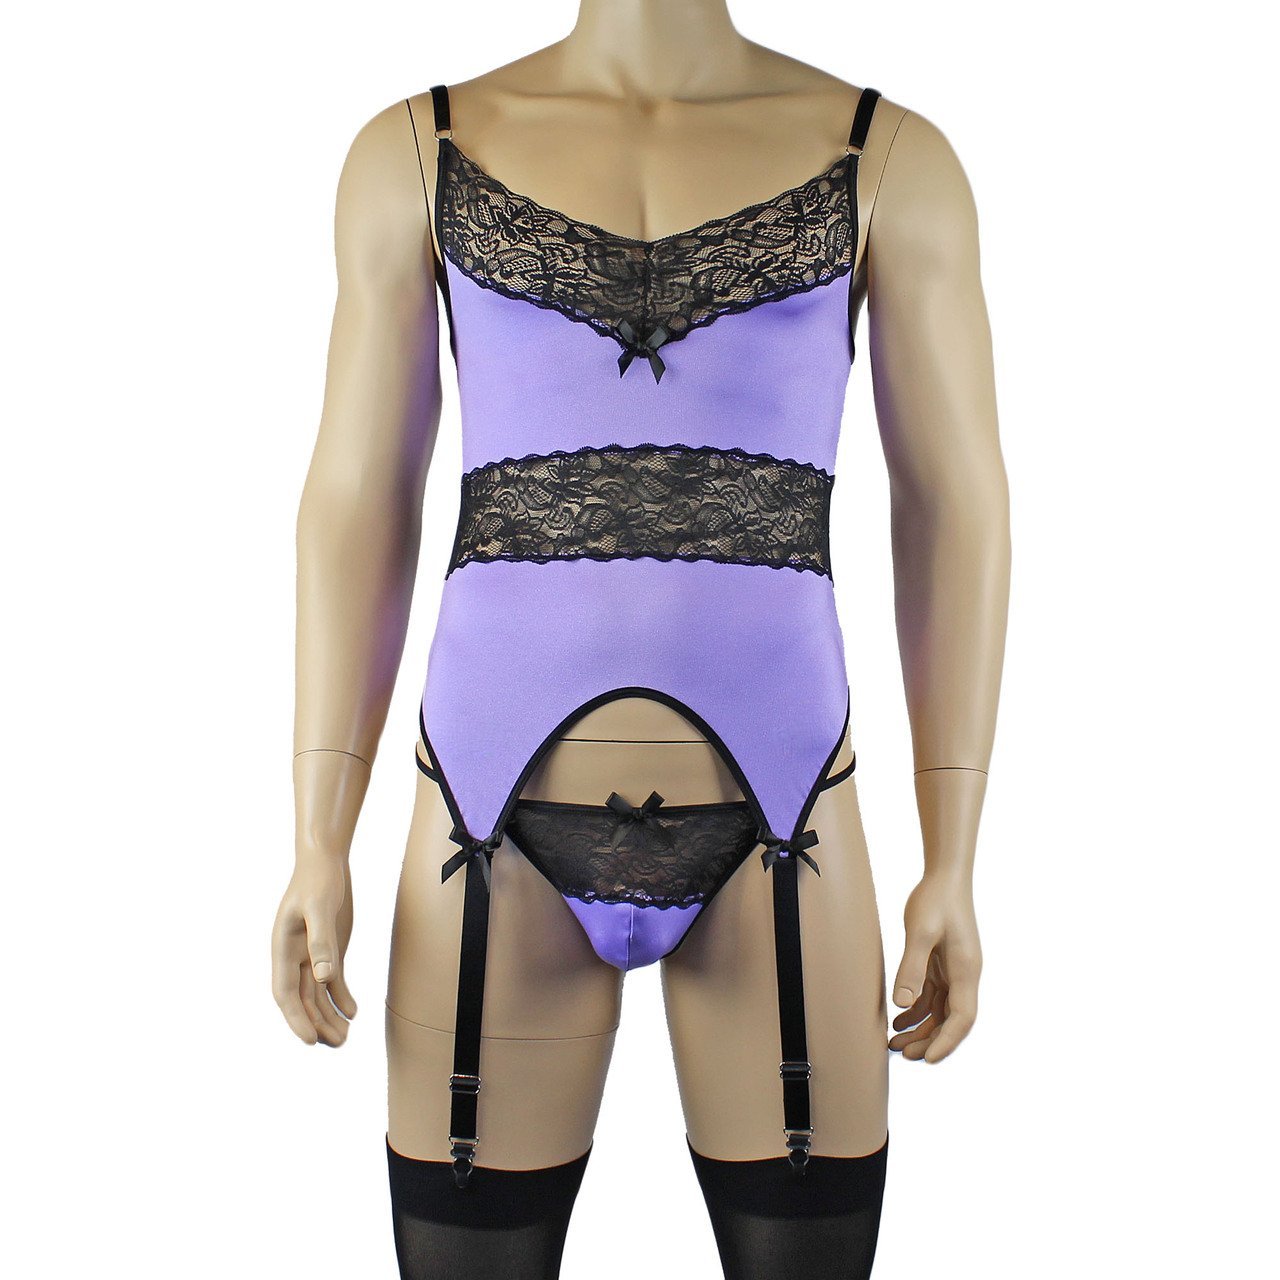 Mens Glamour Lycra & Lace Corset Top, G string & Stockings - Sizes up to 3XL (lilac plus other colours)